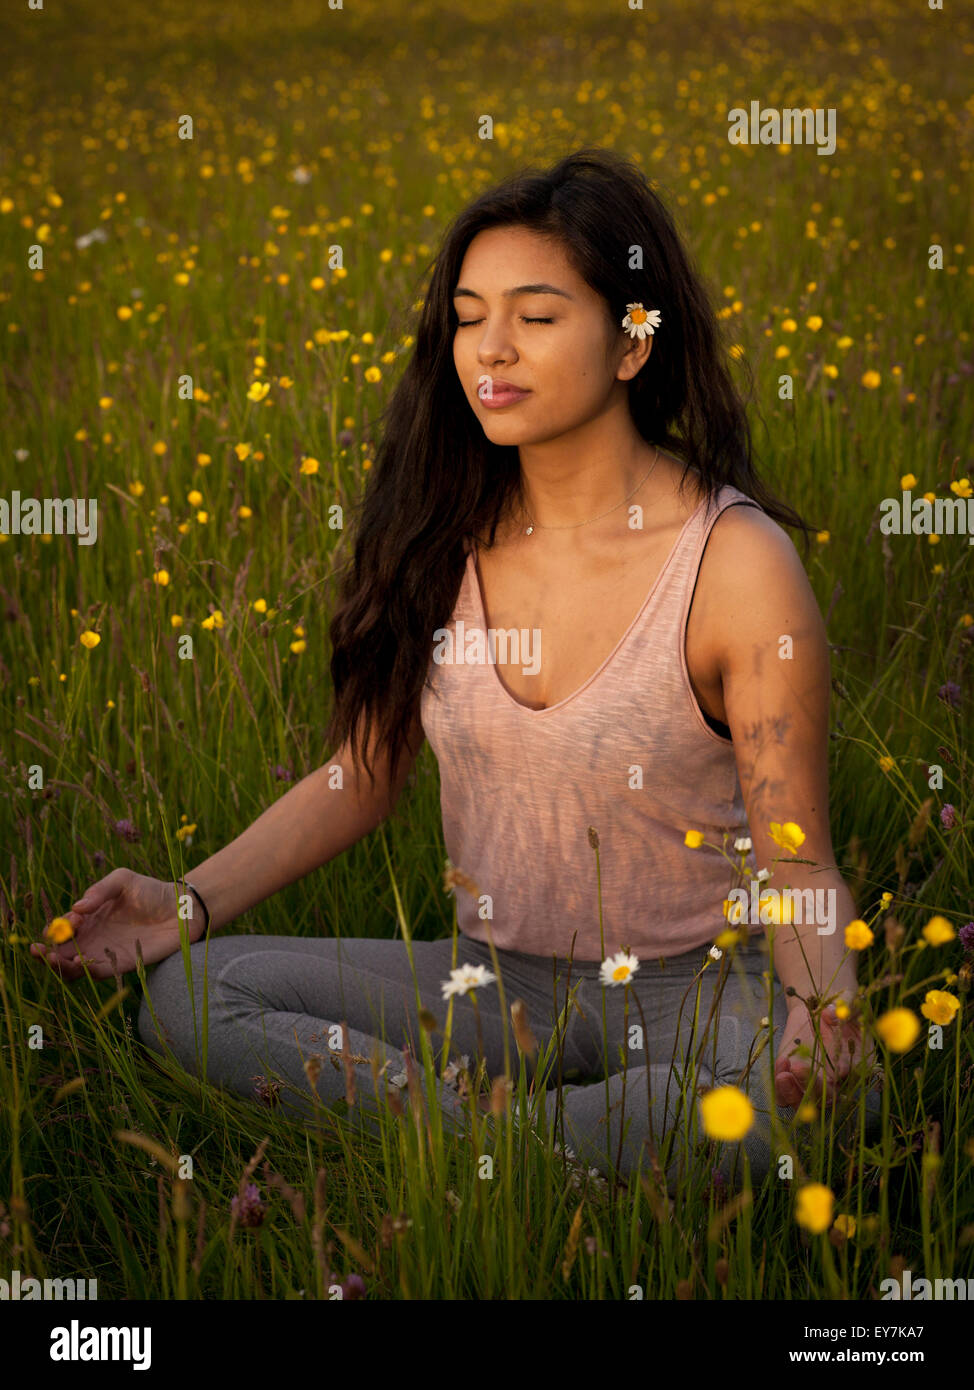 Girl meditating in a wild flower meadow Stock Photo